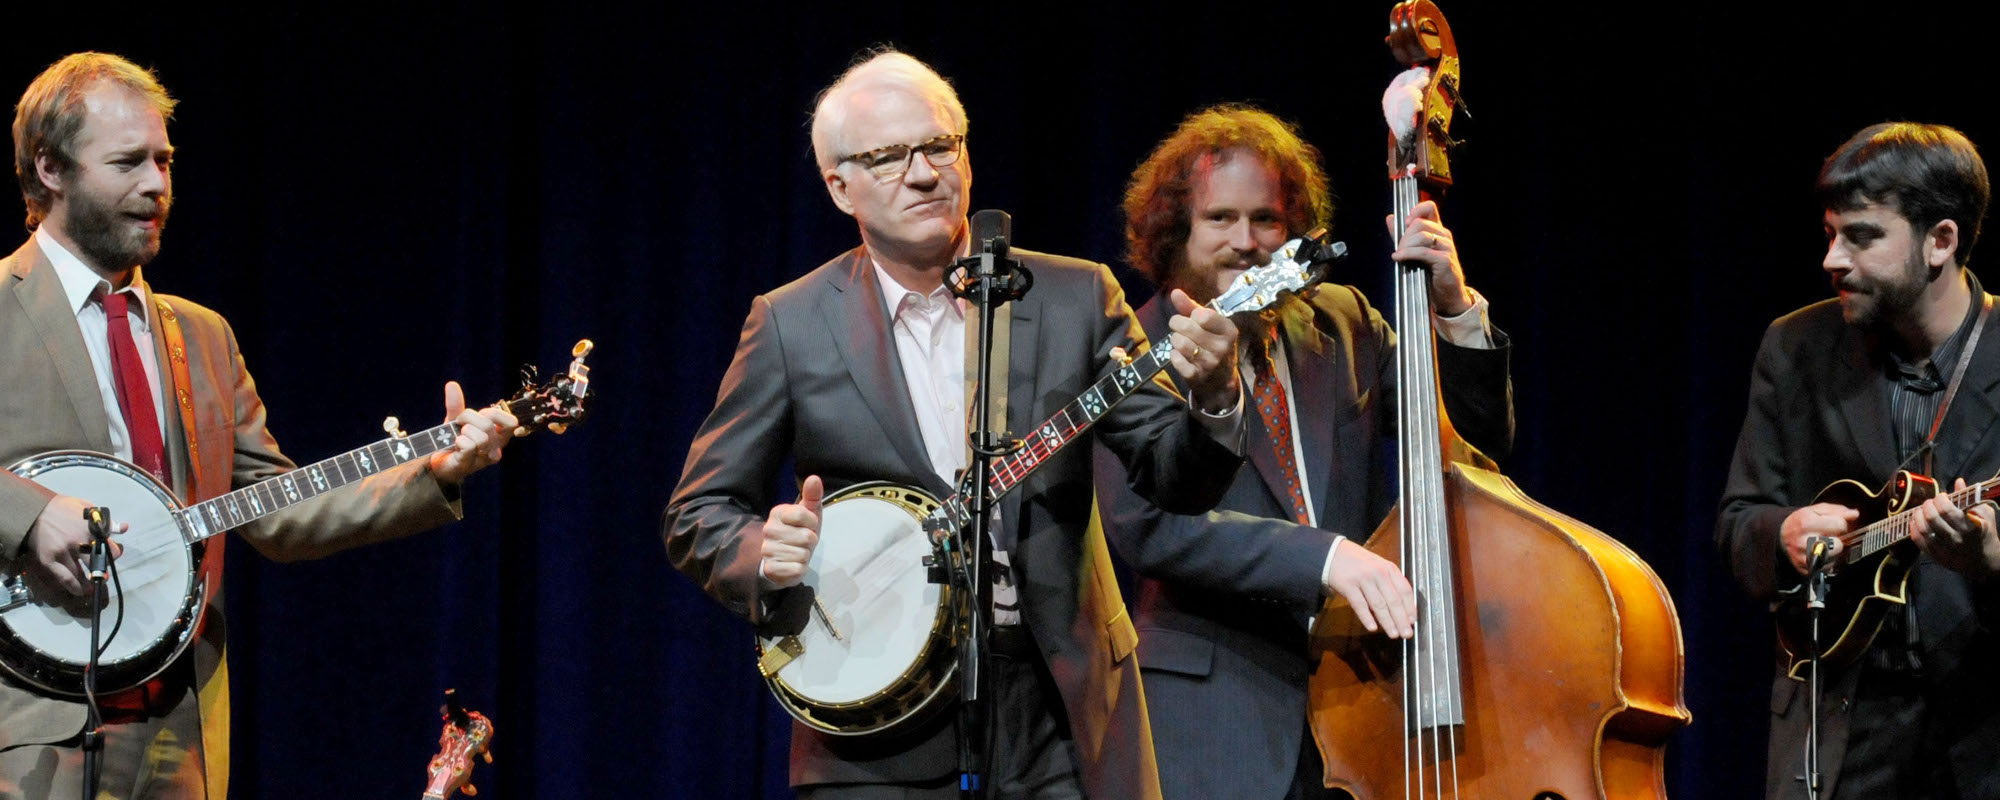 4 Songs You Didn’t Know Featured Steve Martin